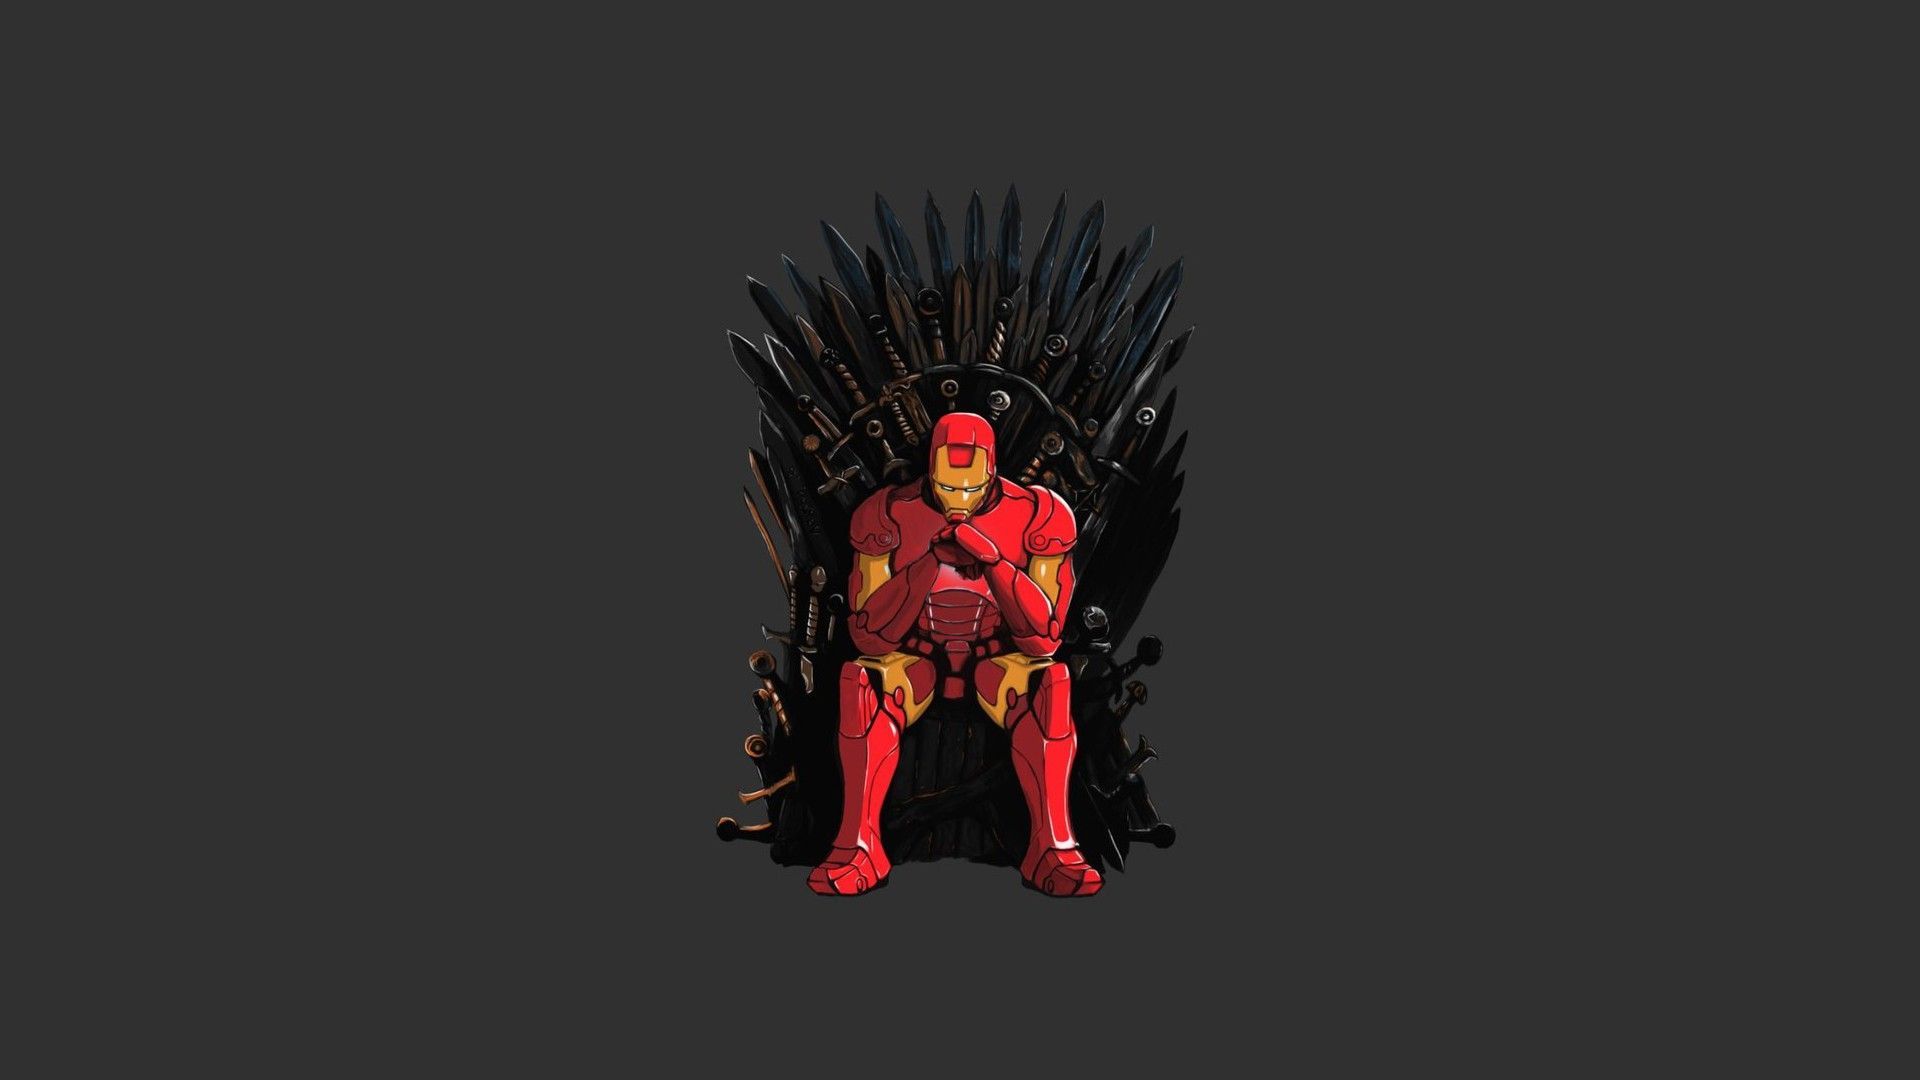 Game of Thrones Iron Man crossover wallpaper 19034